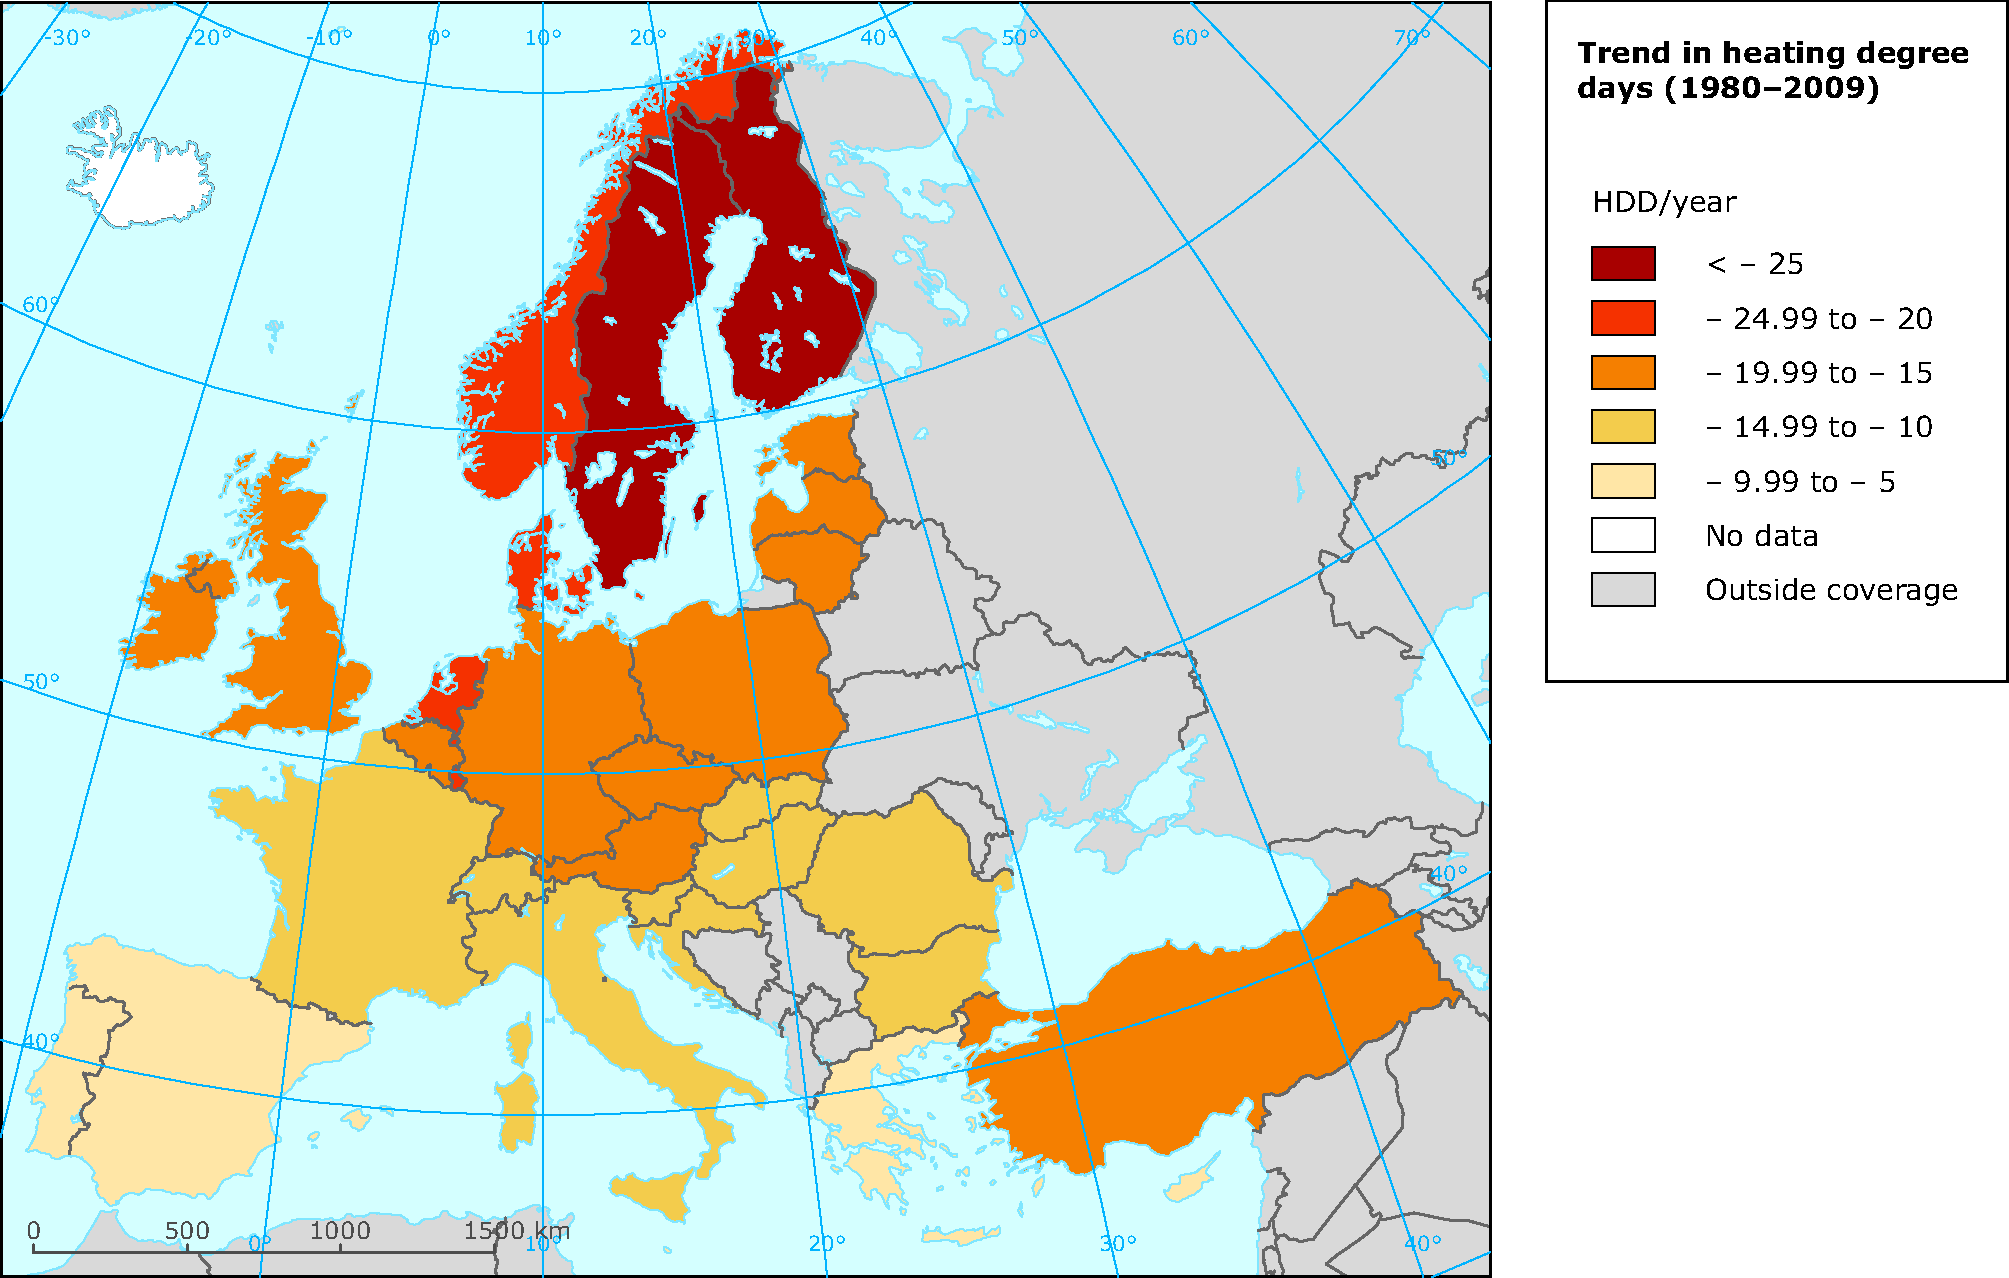 Trend in heating degree days in the EU-27